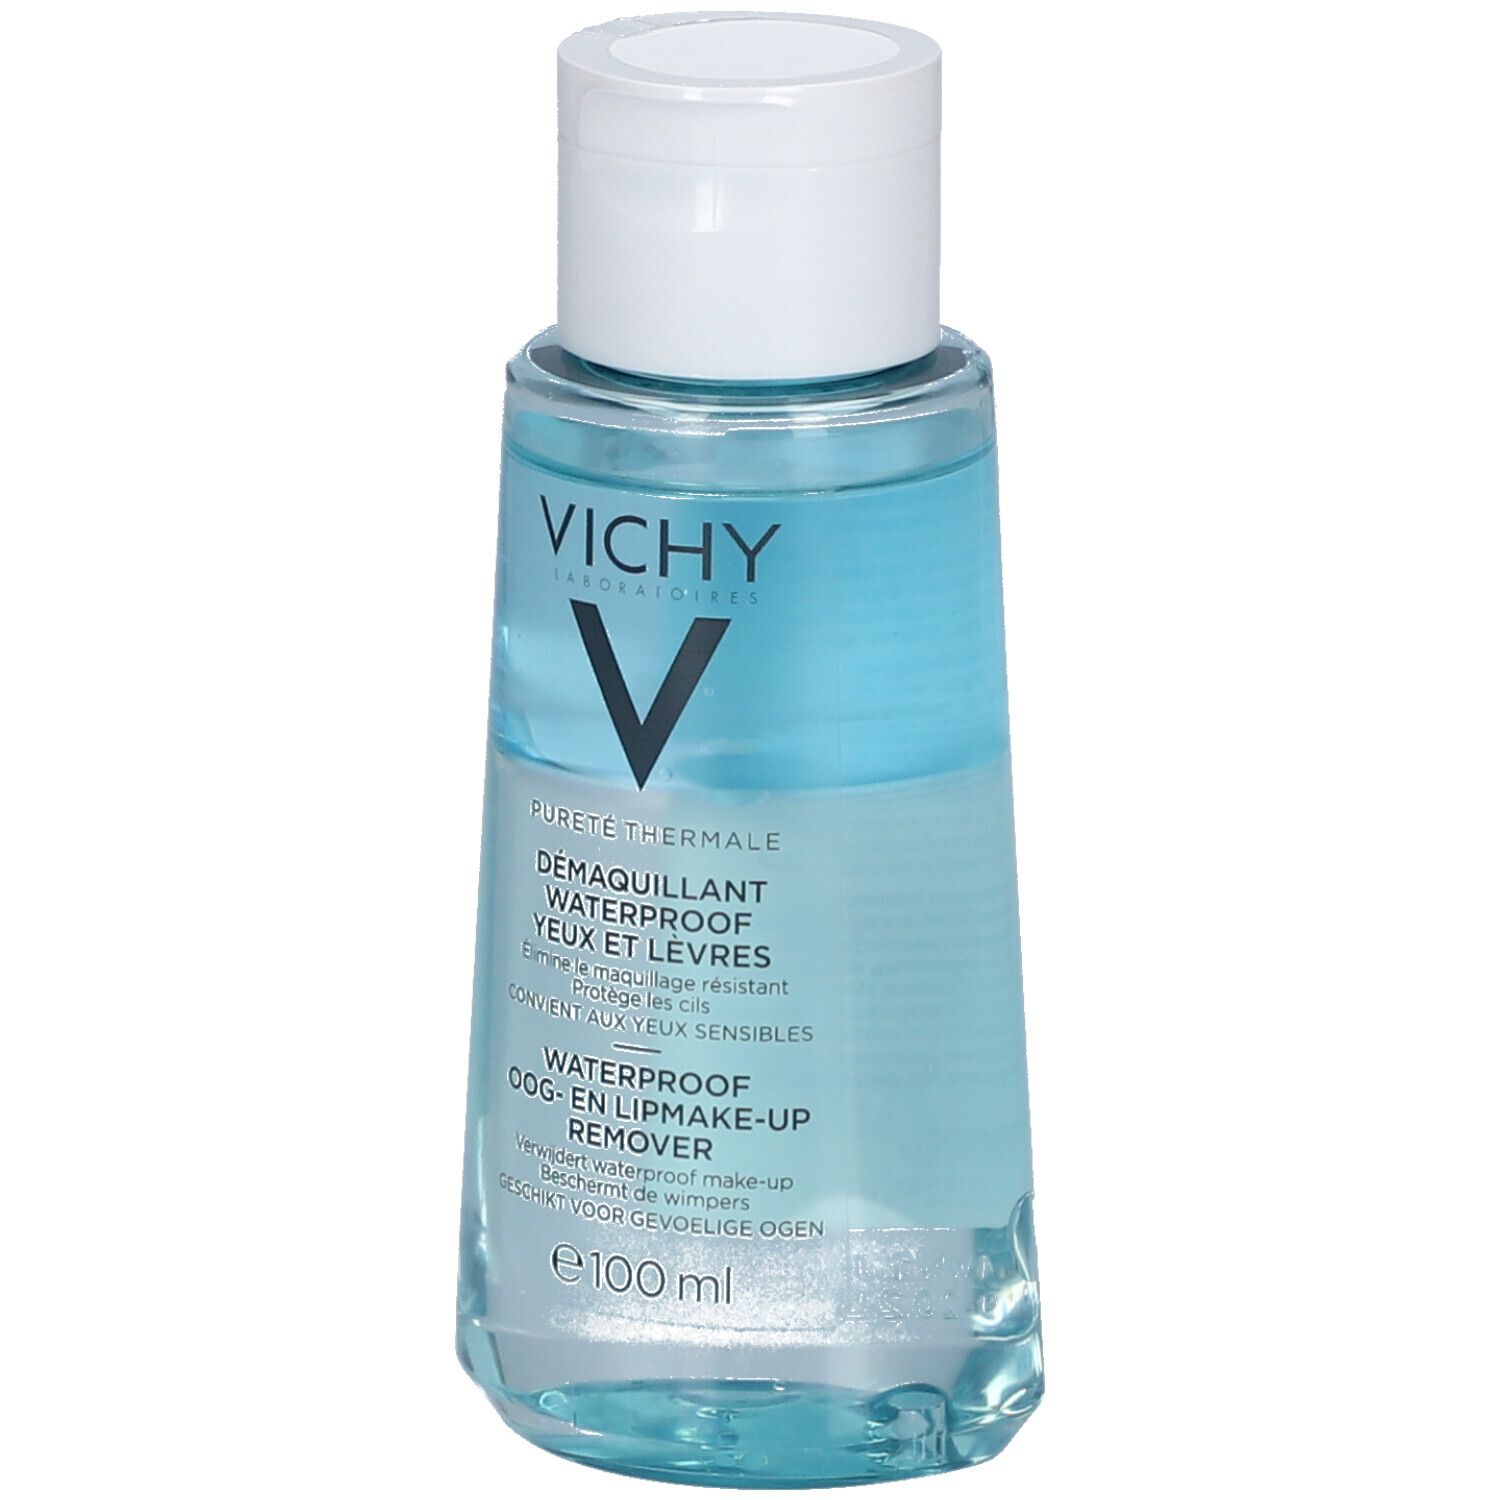 PURETE THERMALE DEMAQUILLANT WATERPROOF YEUX LEVRES 100ml VICHY